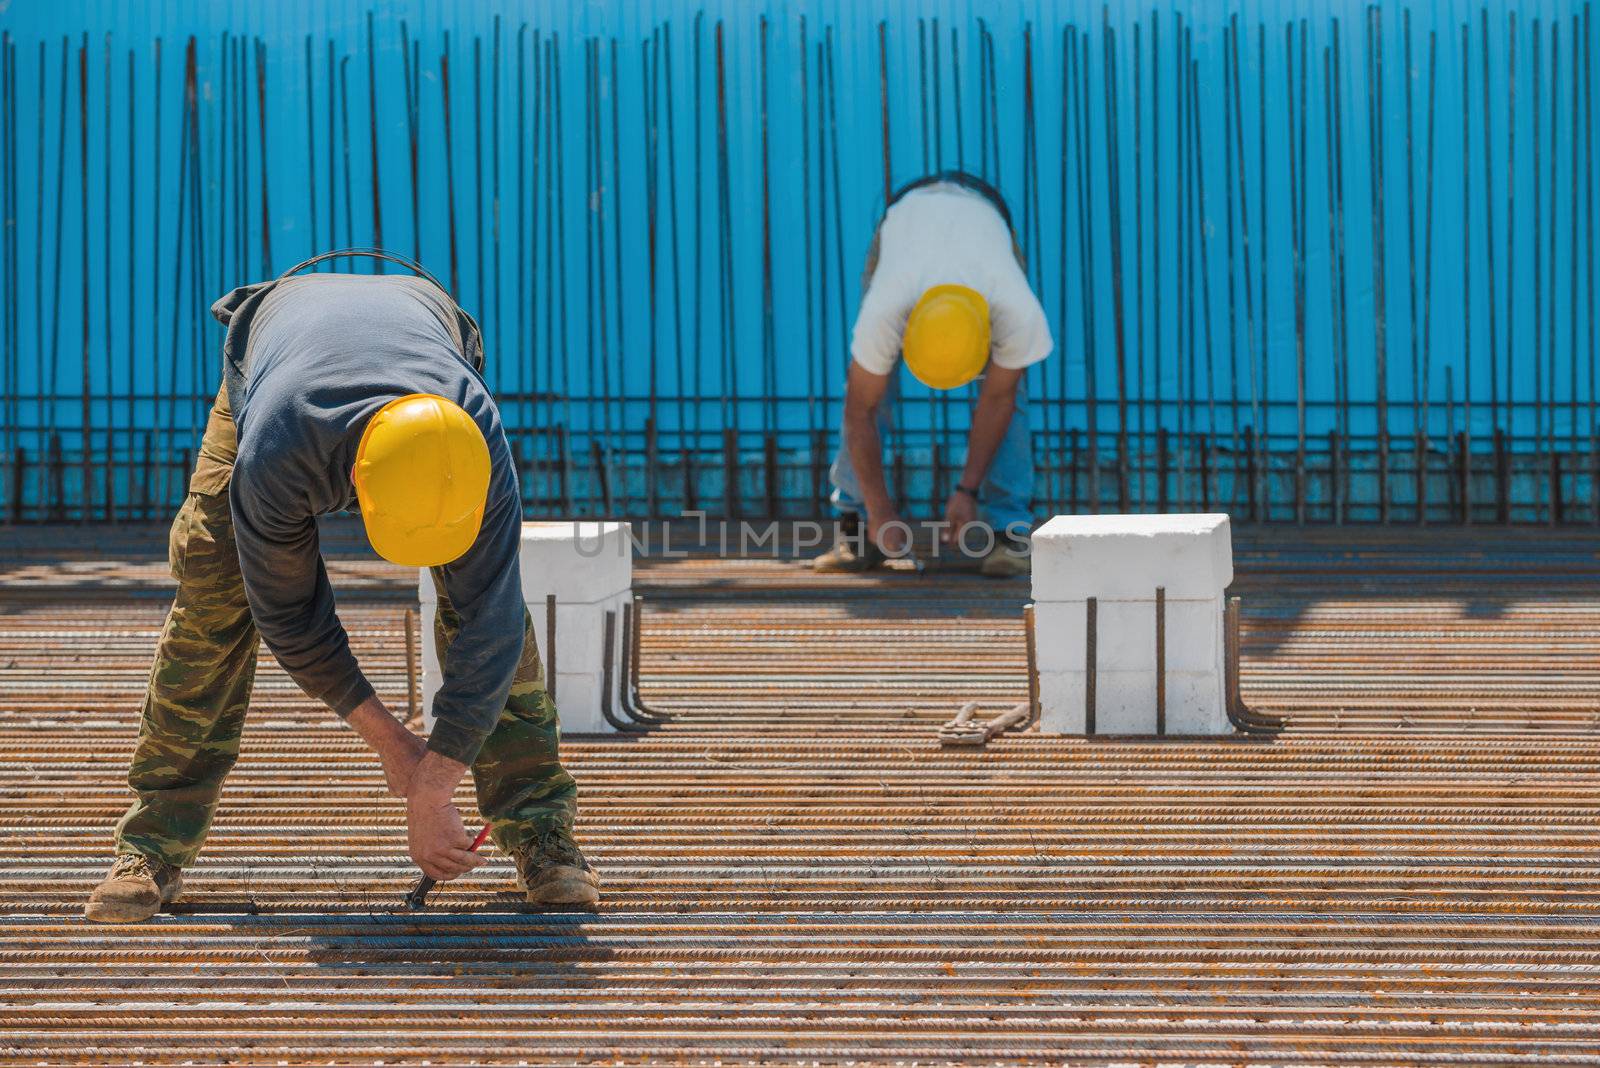 Authentic construction workers installing binding wires to reinforcement steel bars in front of a blue insulated surface prior to pouring concrete